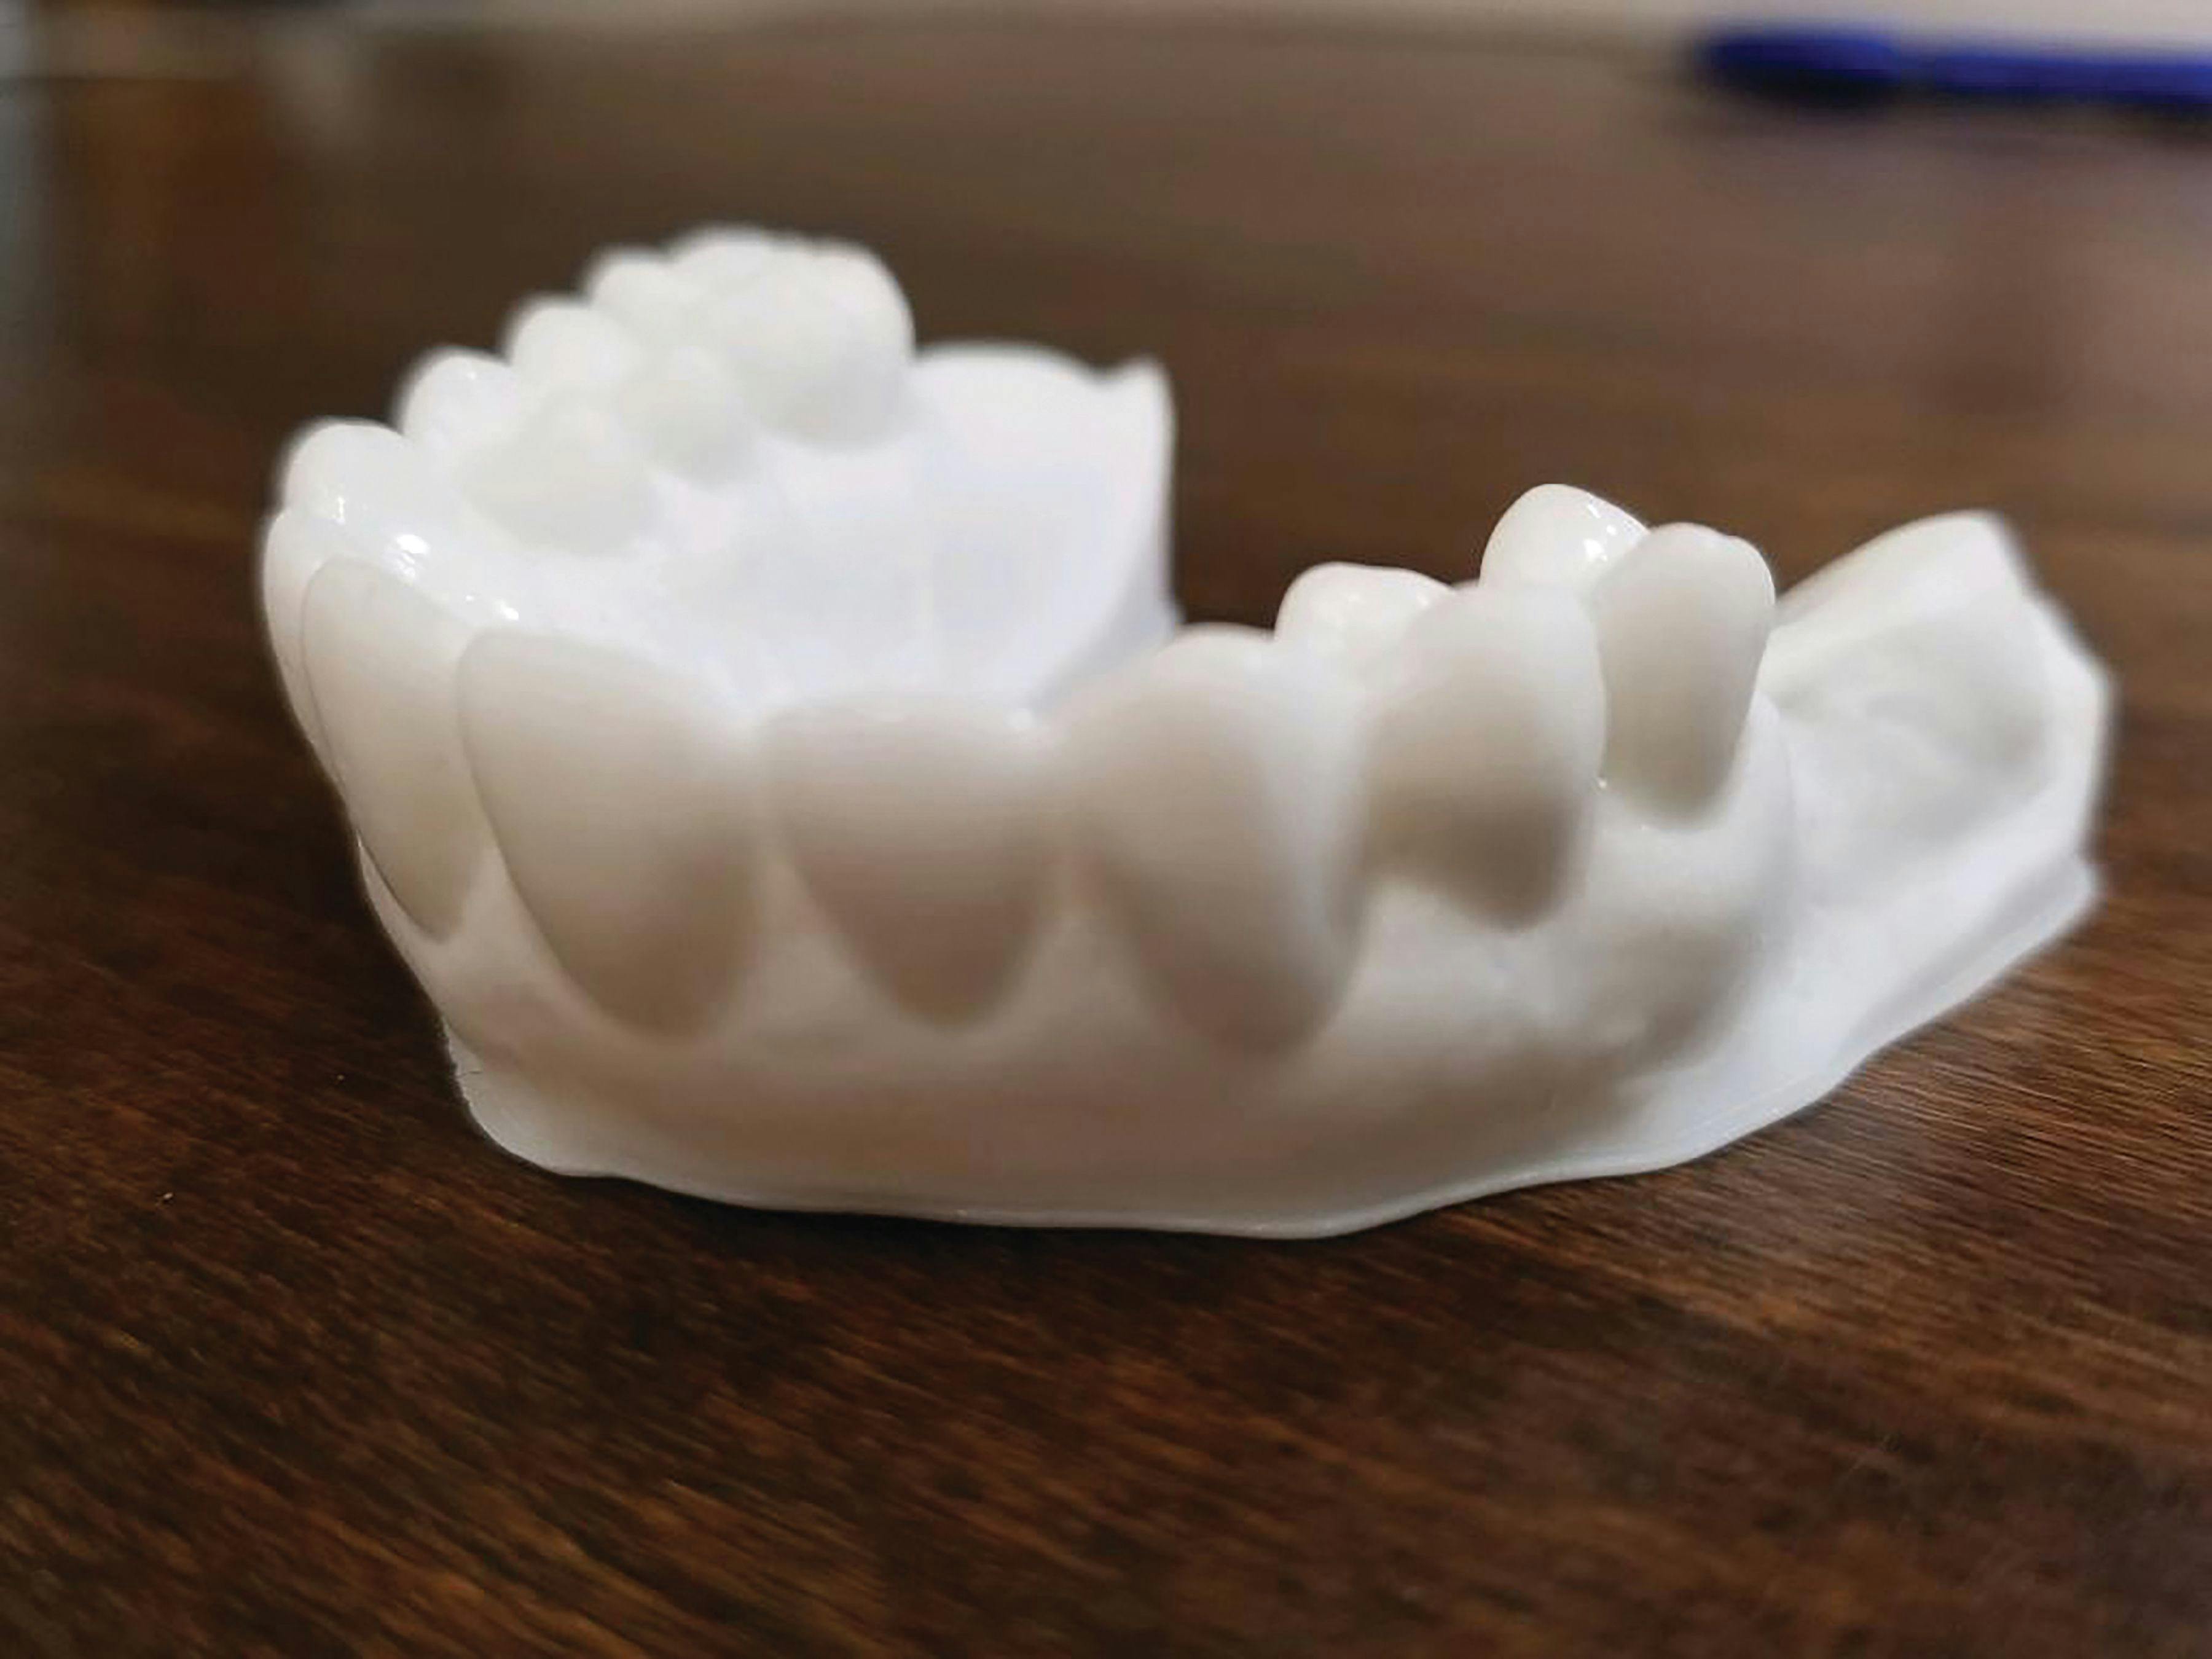 Vega’s Dental Laboratory Solutions scans, designs,  and prints a large percentage  of its total production.  A model is shown here.